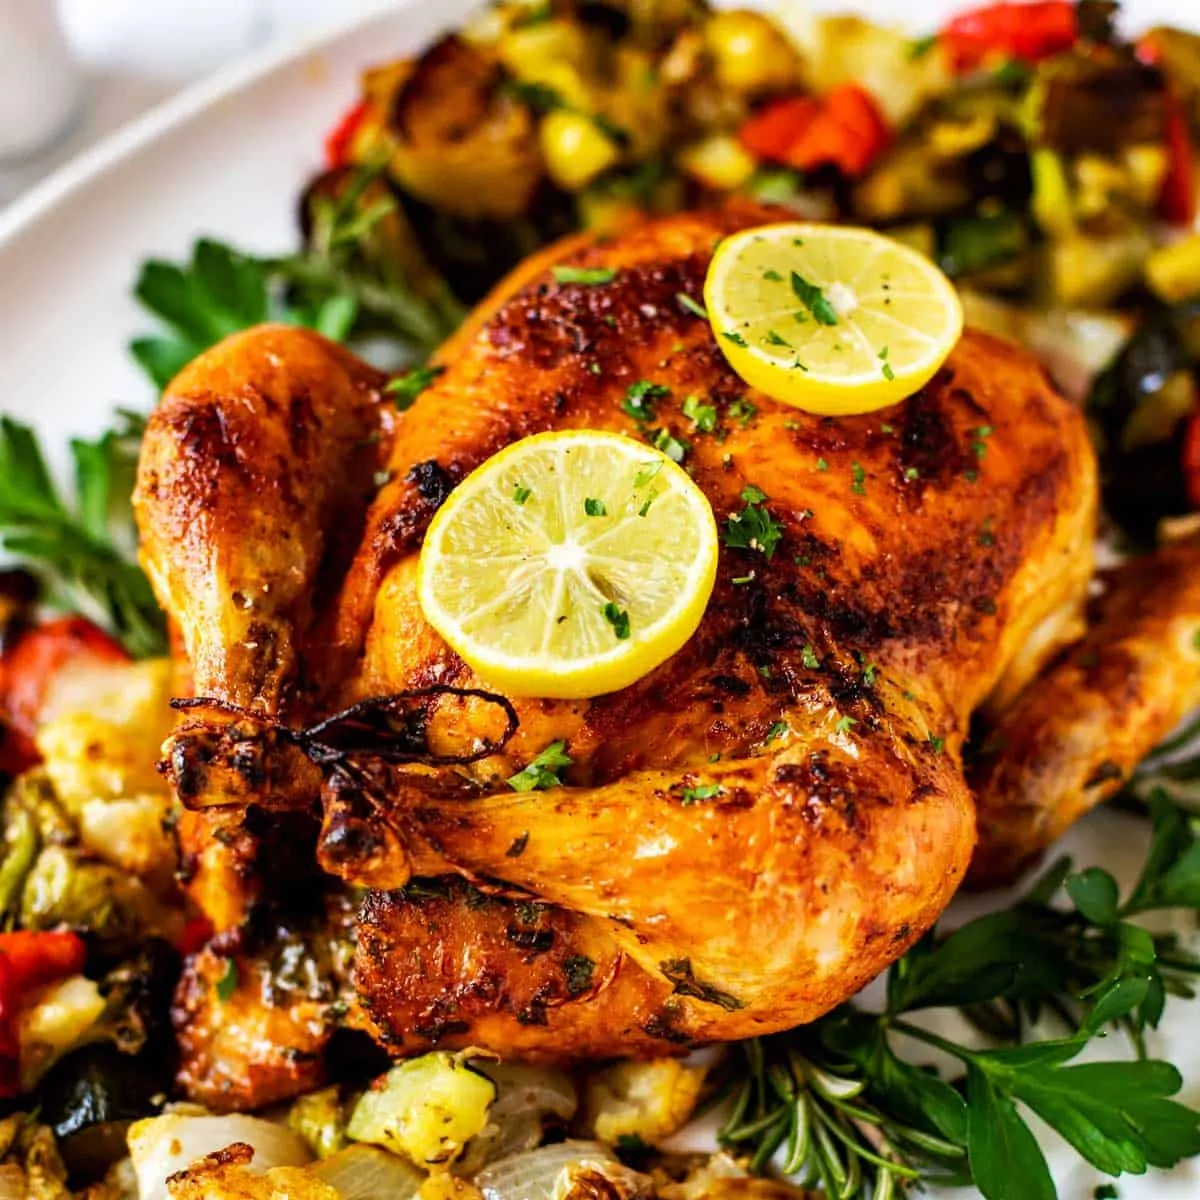 Roasted chicken and vegetables. Keto Diet Malaysia - Shop Journey